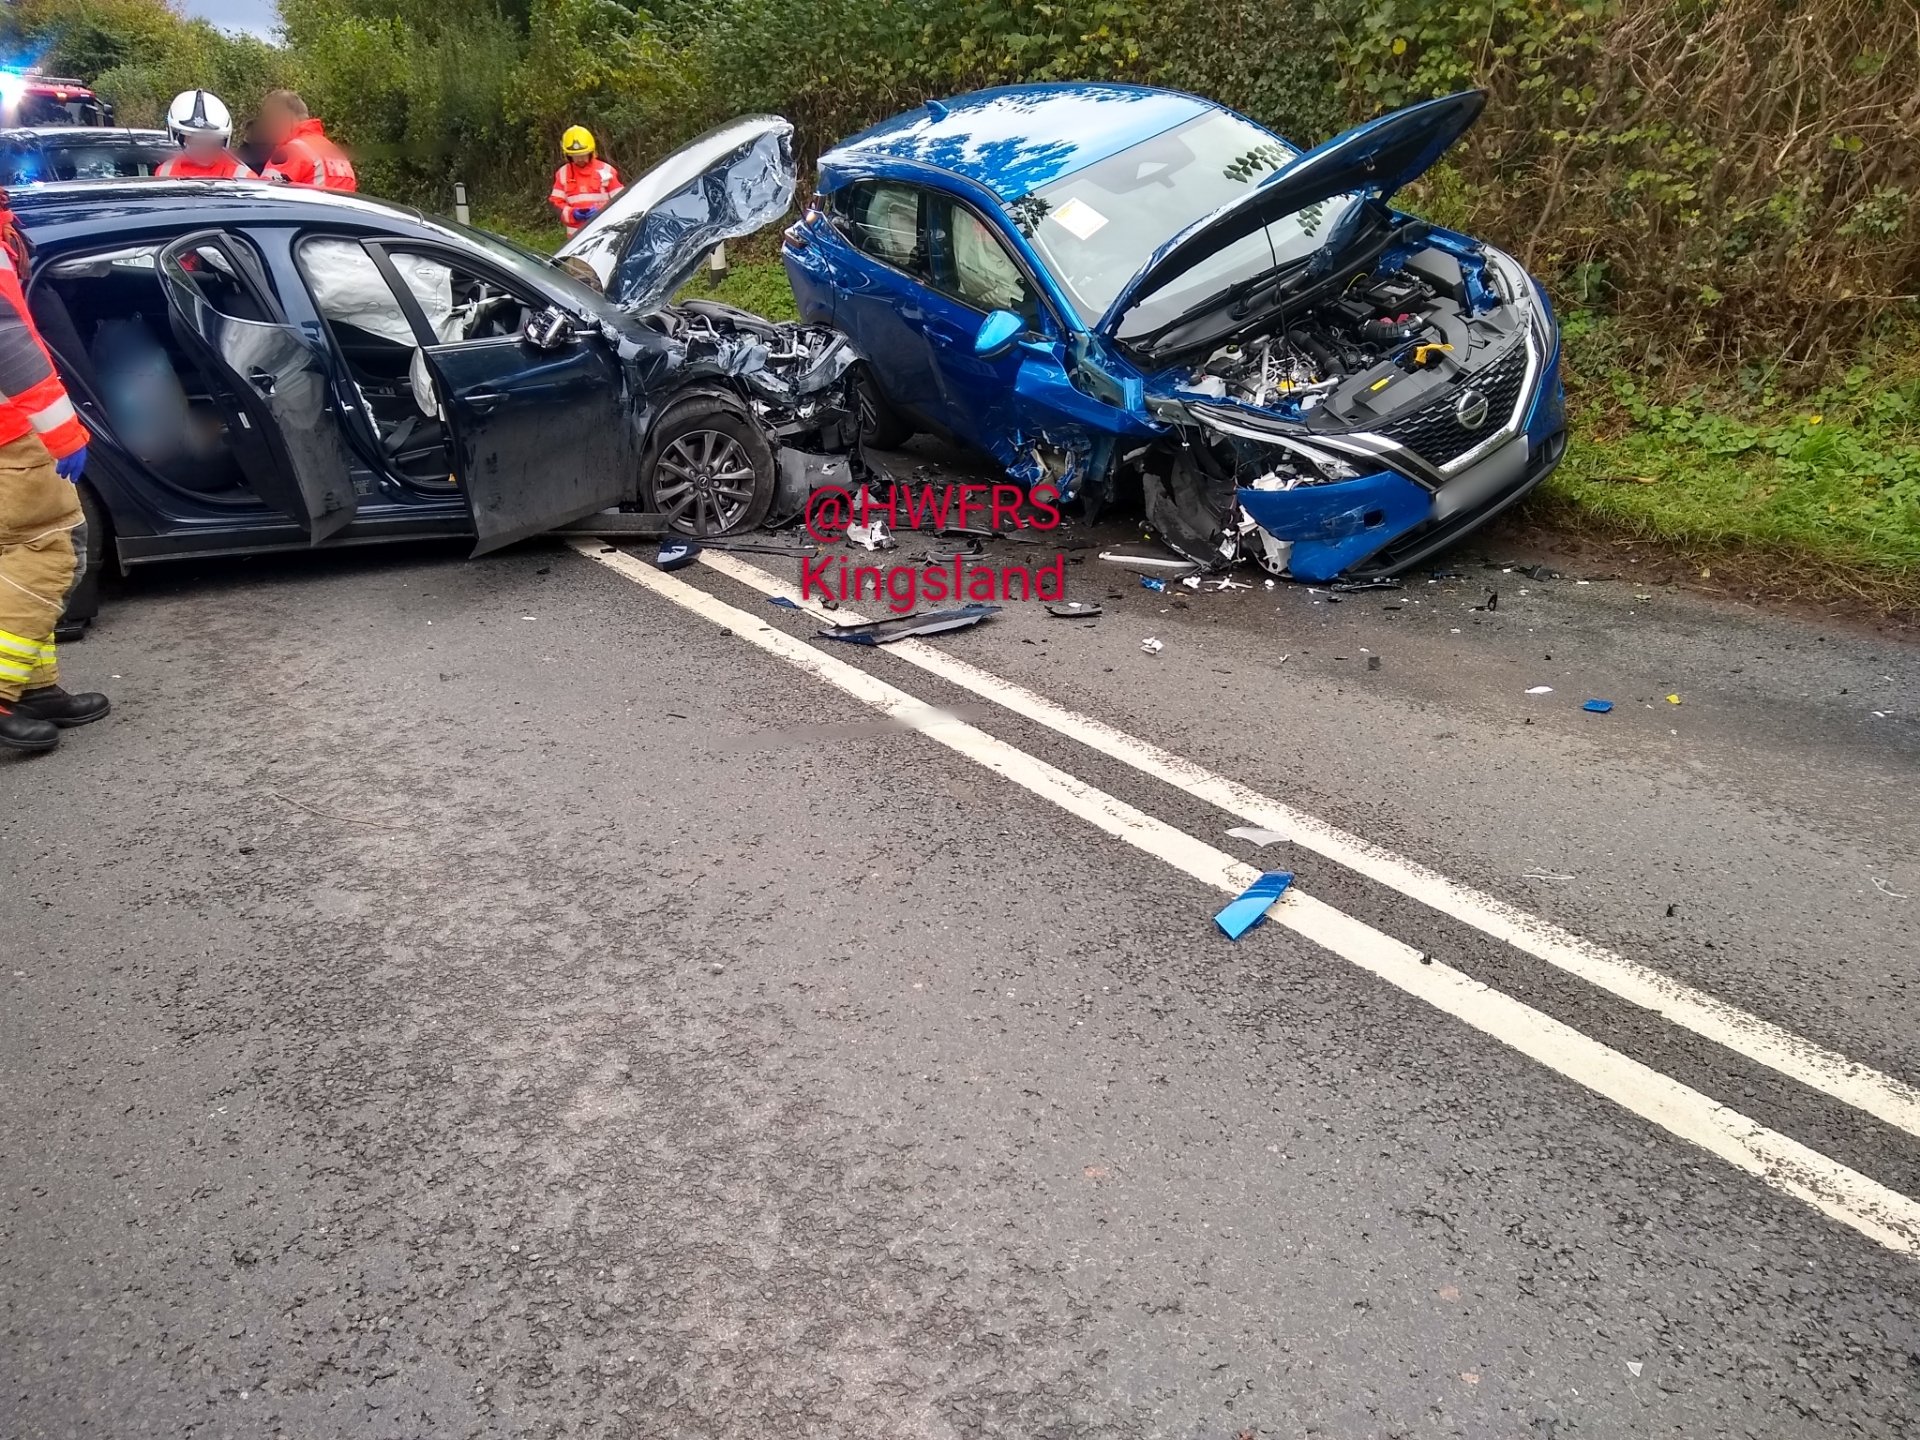 NEWS | Emergency services called to collision in Herefordshire